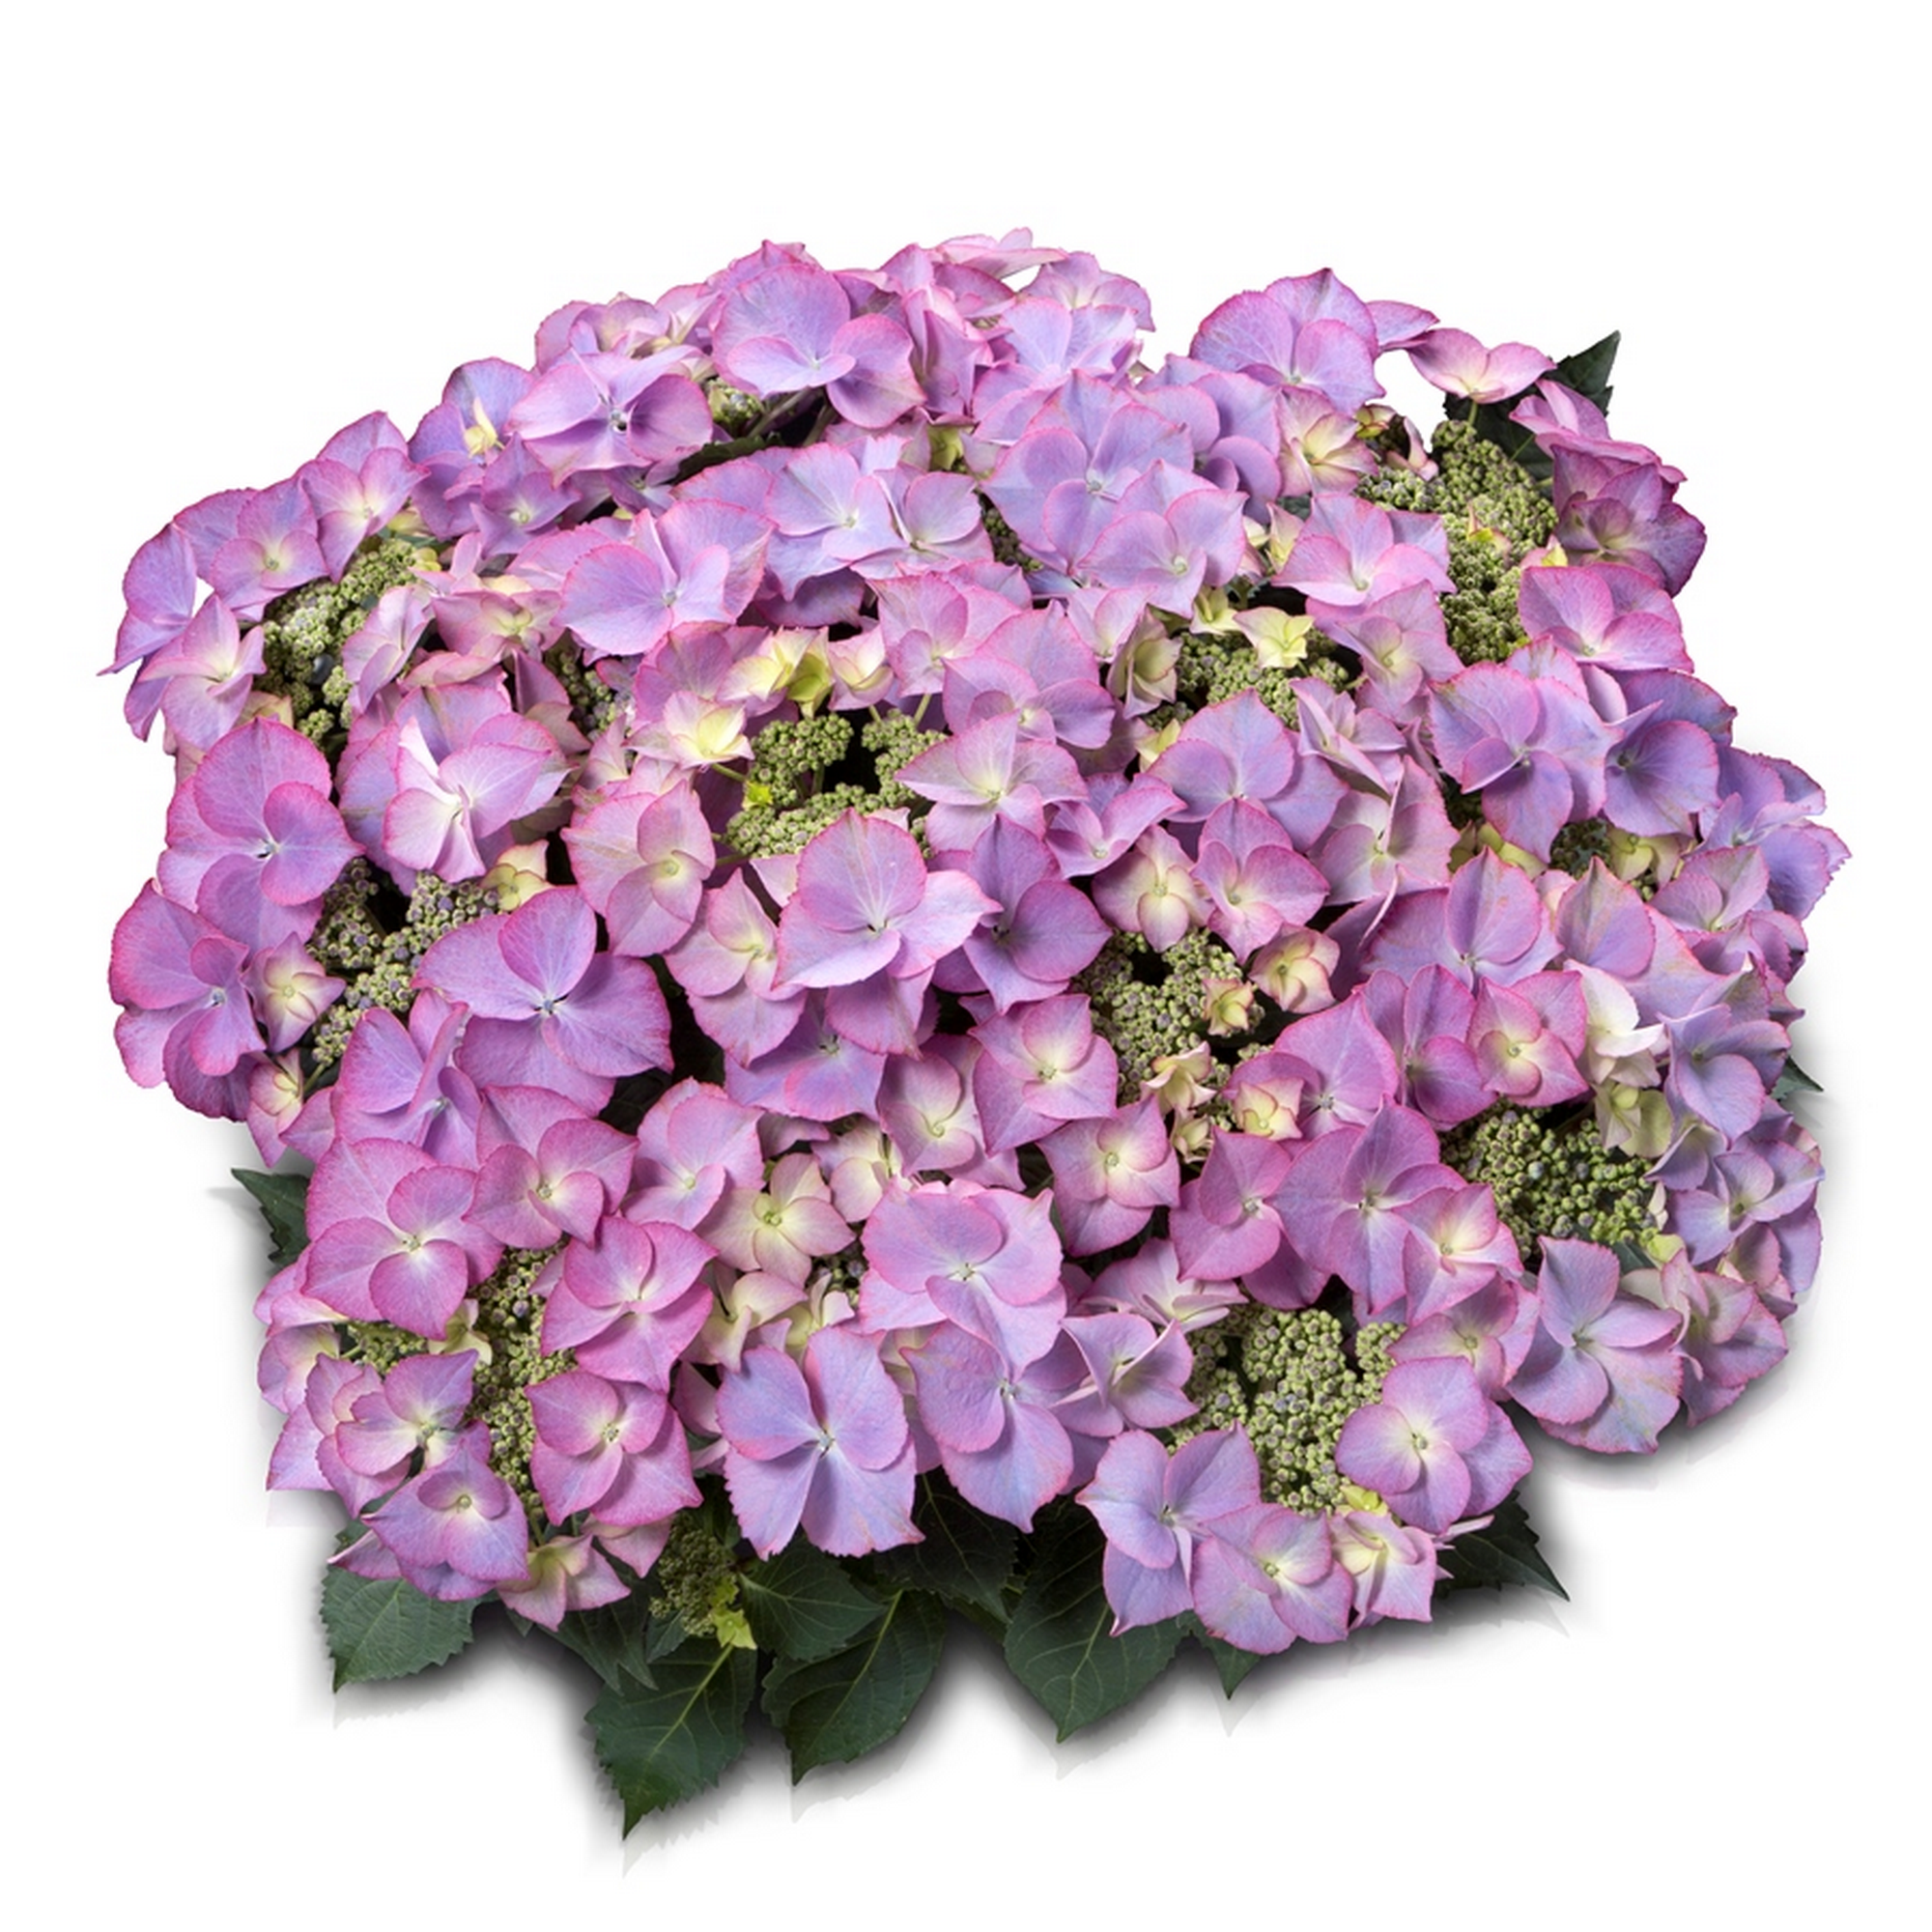 Hortensie 'Royalty® Tiffany Blue' Topf Ø 23 cm + product picture